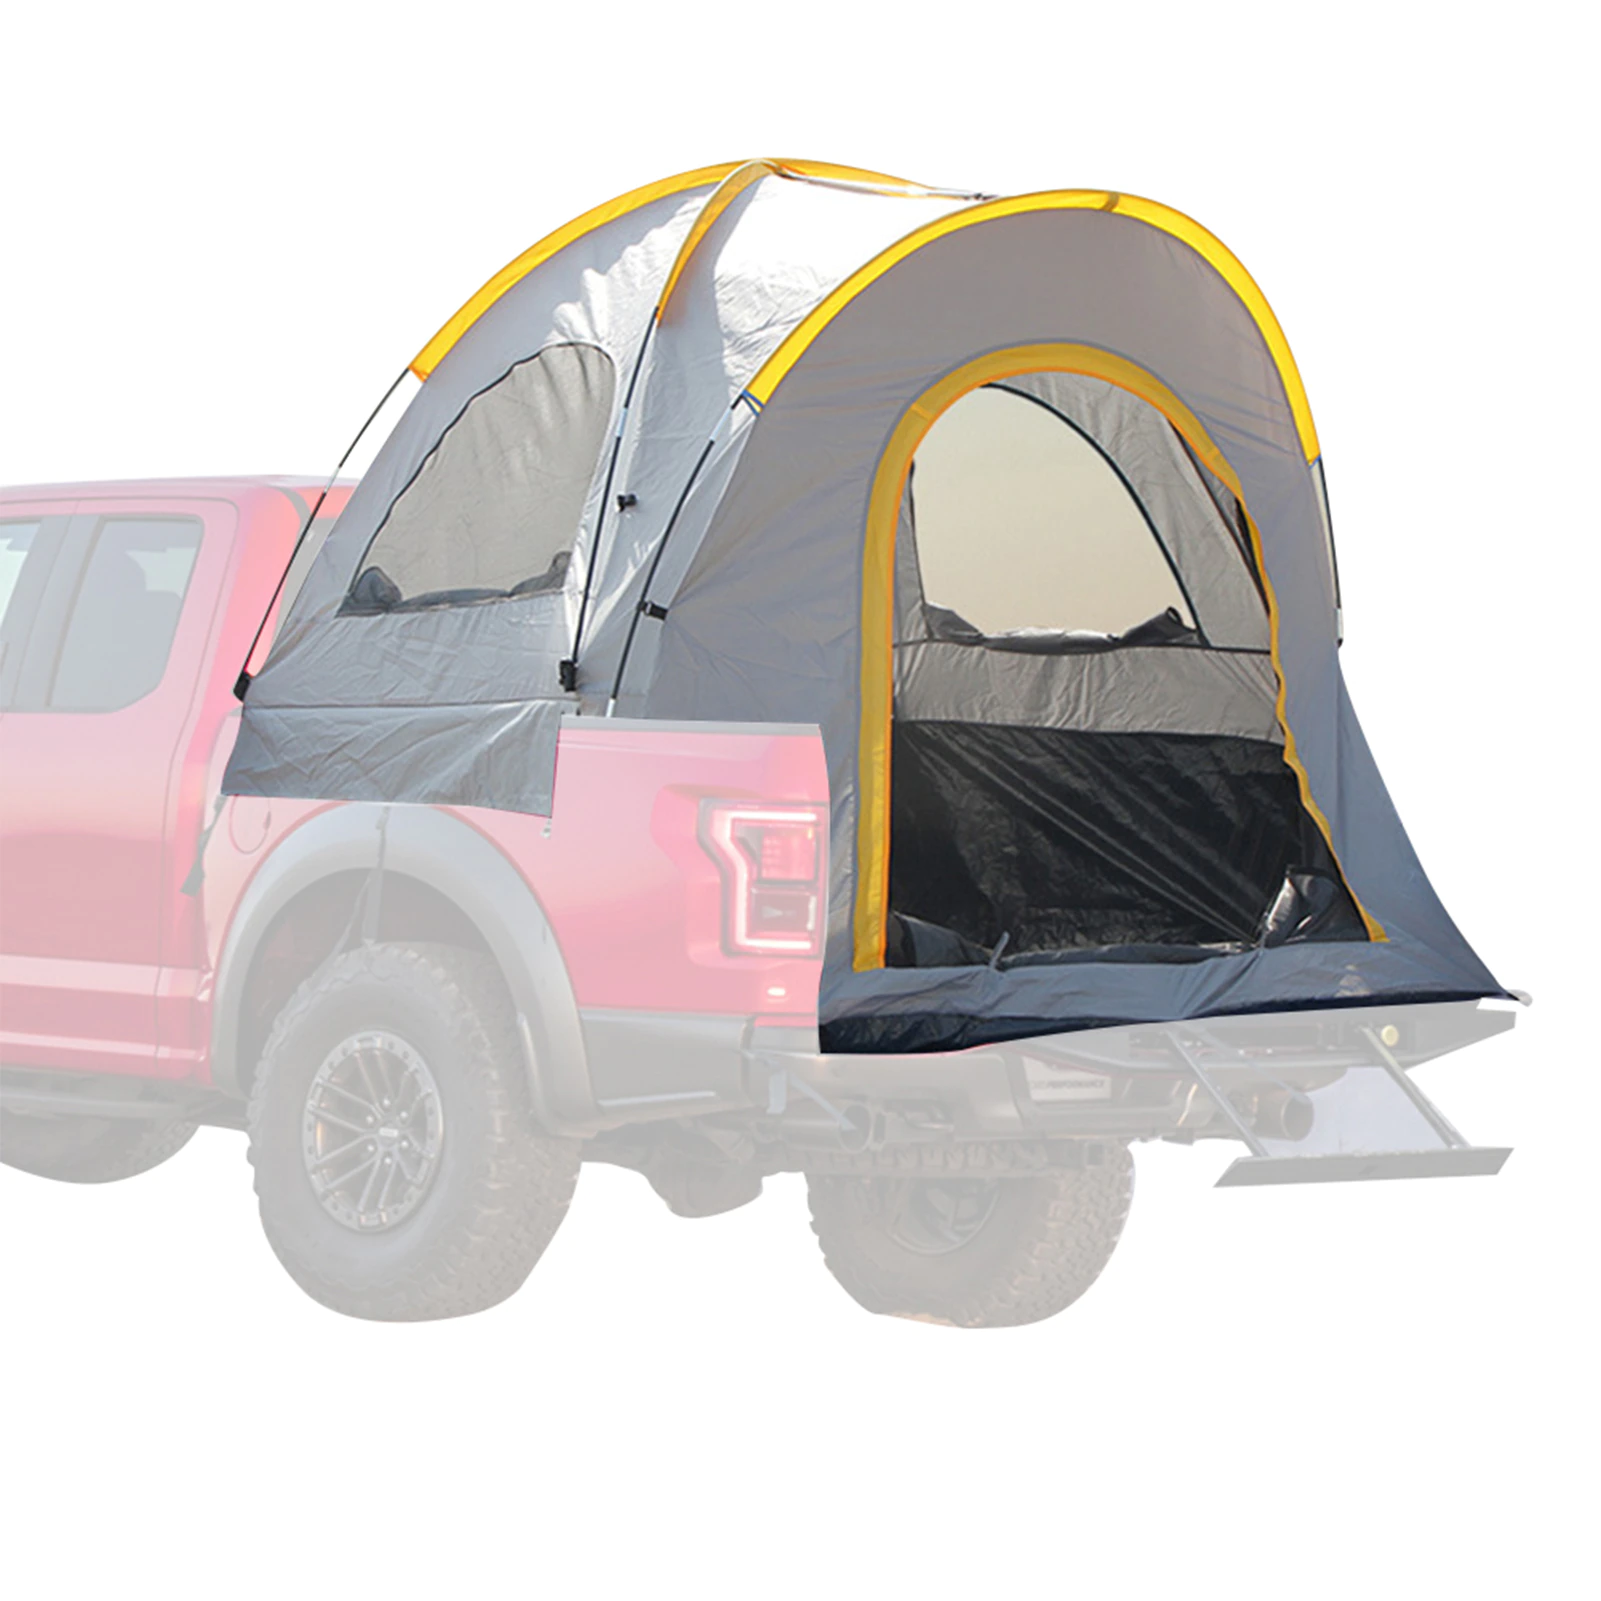 Cheap Goat Tents 5.5ft Truck Bed Tent Pickup Tent For Truck Outdoor Camping Weatherproof 210D Oxford Cloth Glass Fiber For Outdoor Camping